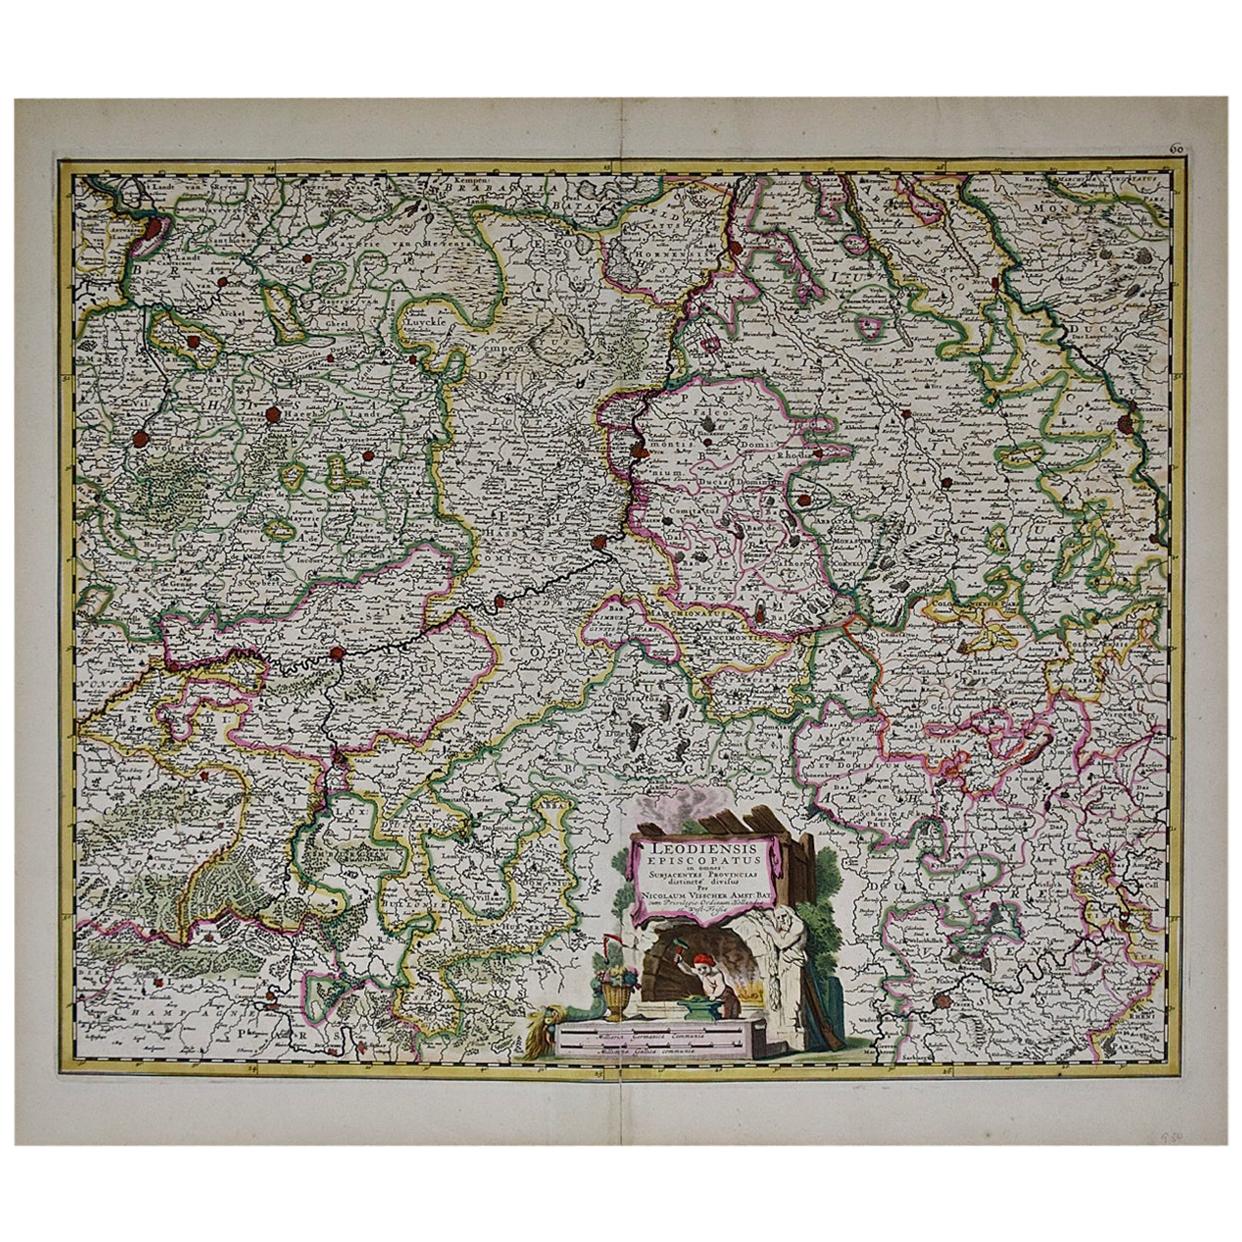 17th Century Hand Colored Map of the Liege Region in Belgium by Visscher